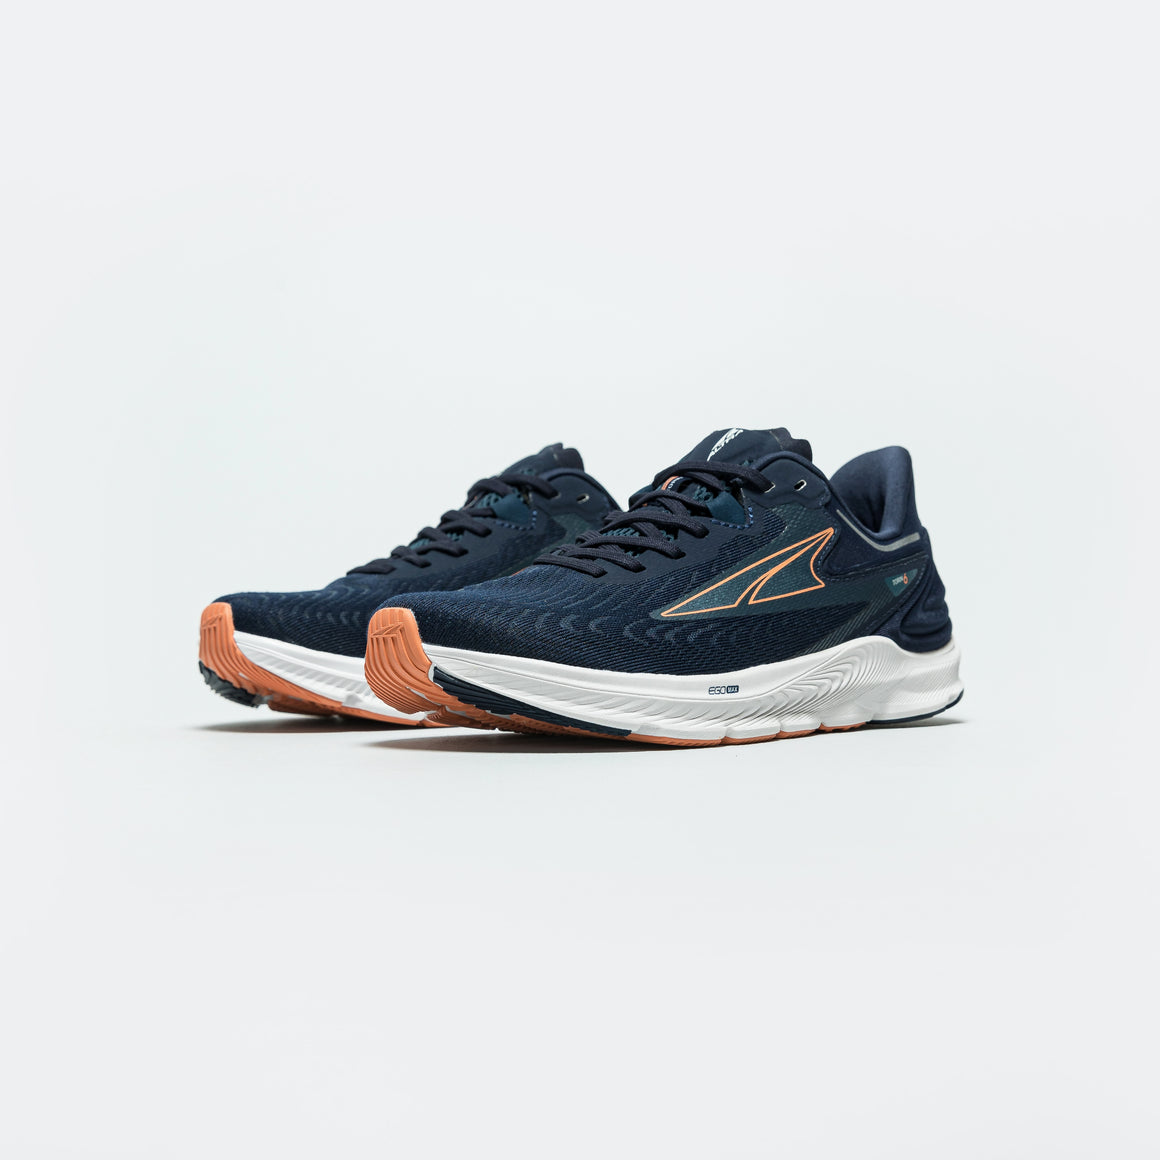 Womens Torin 6 - Navy/Coral